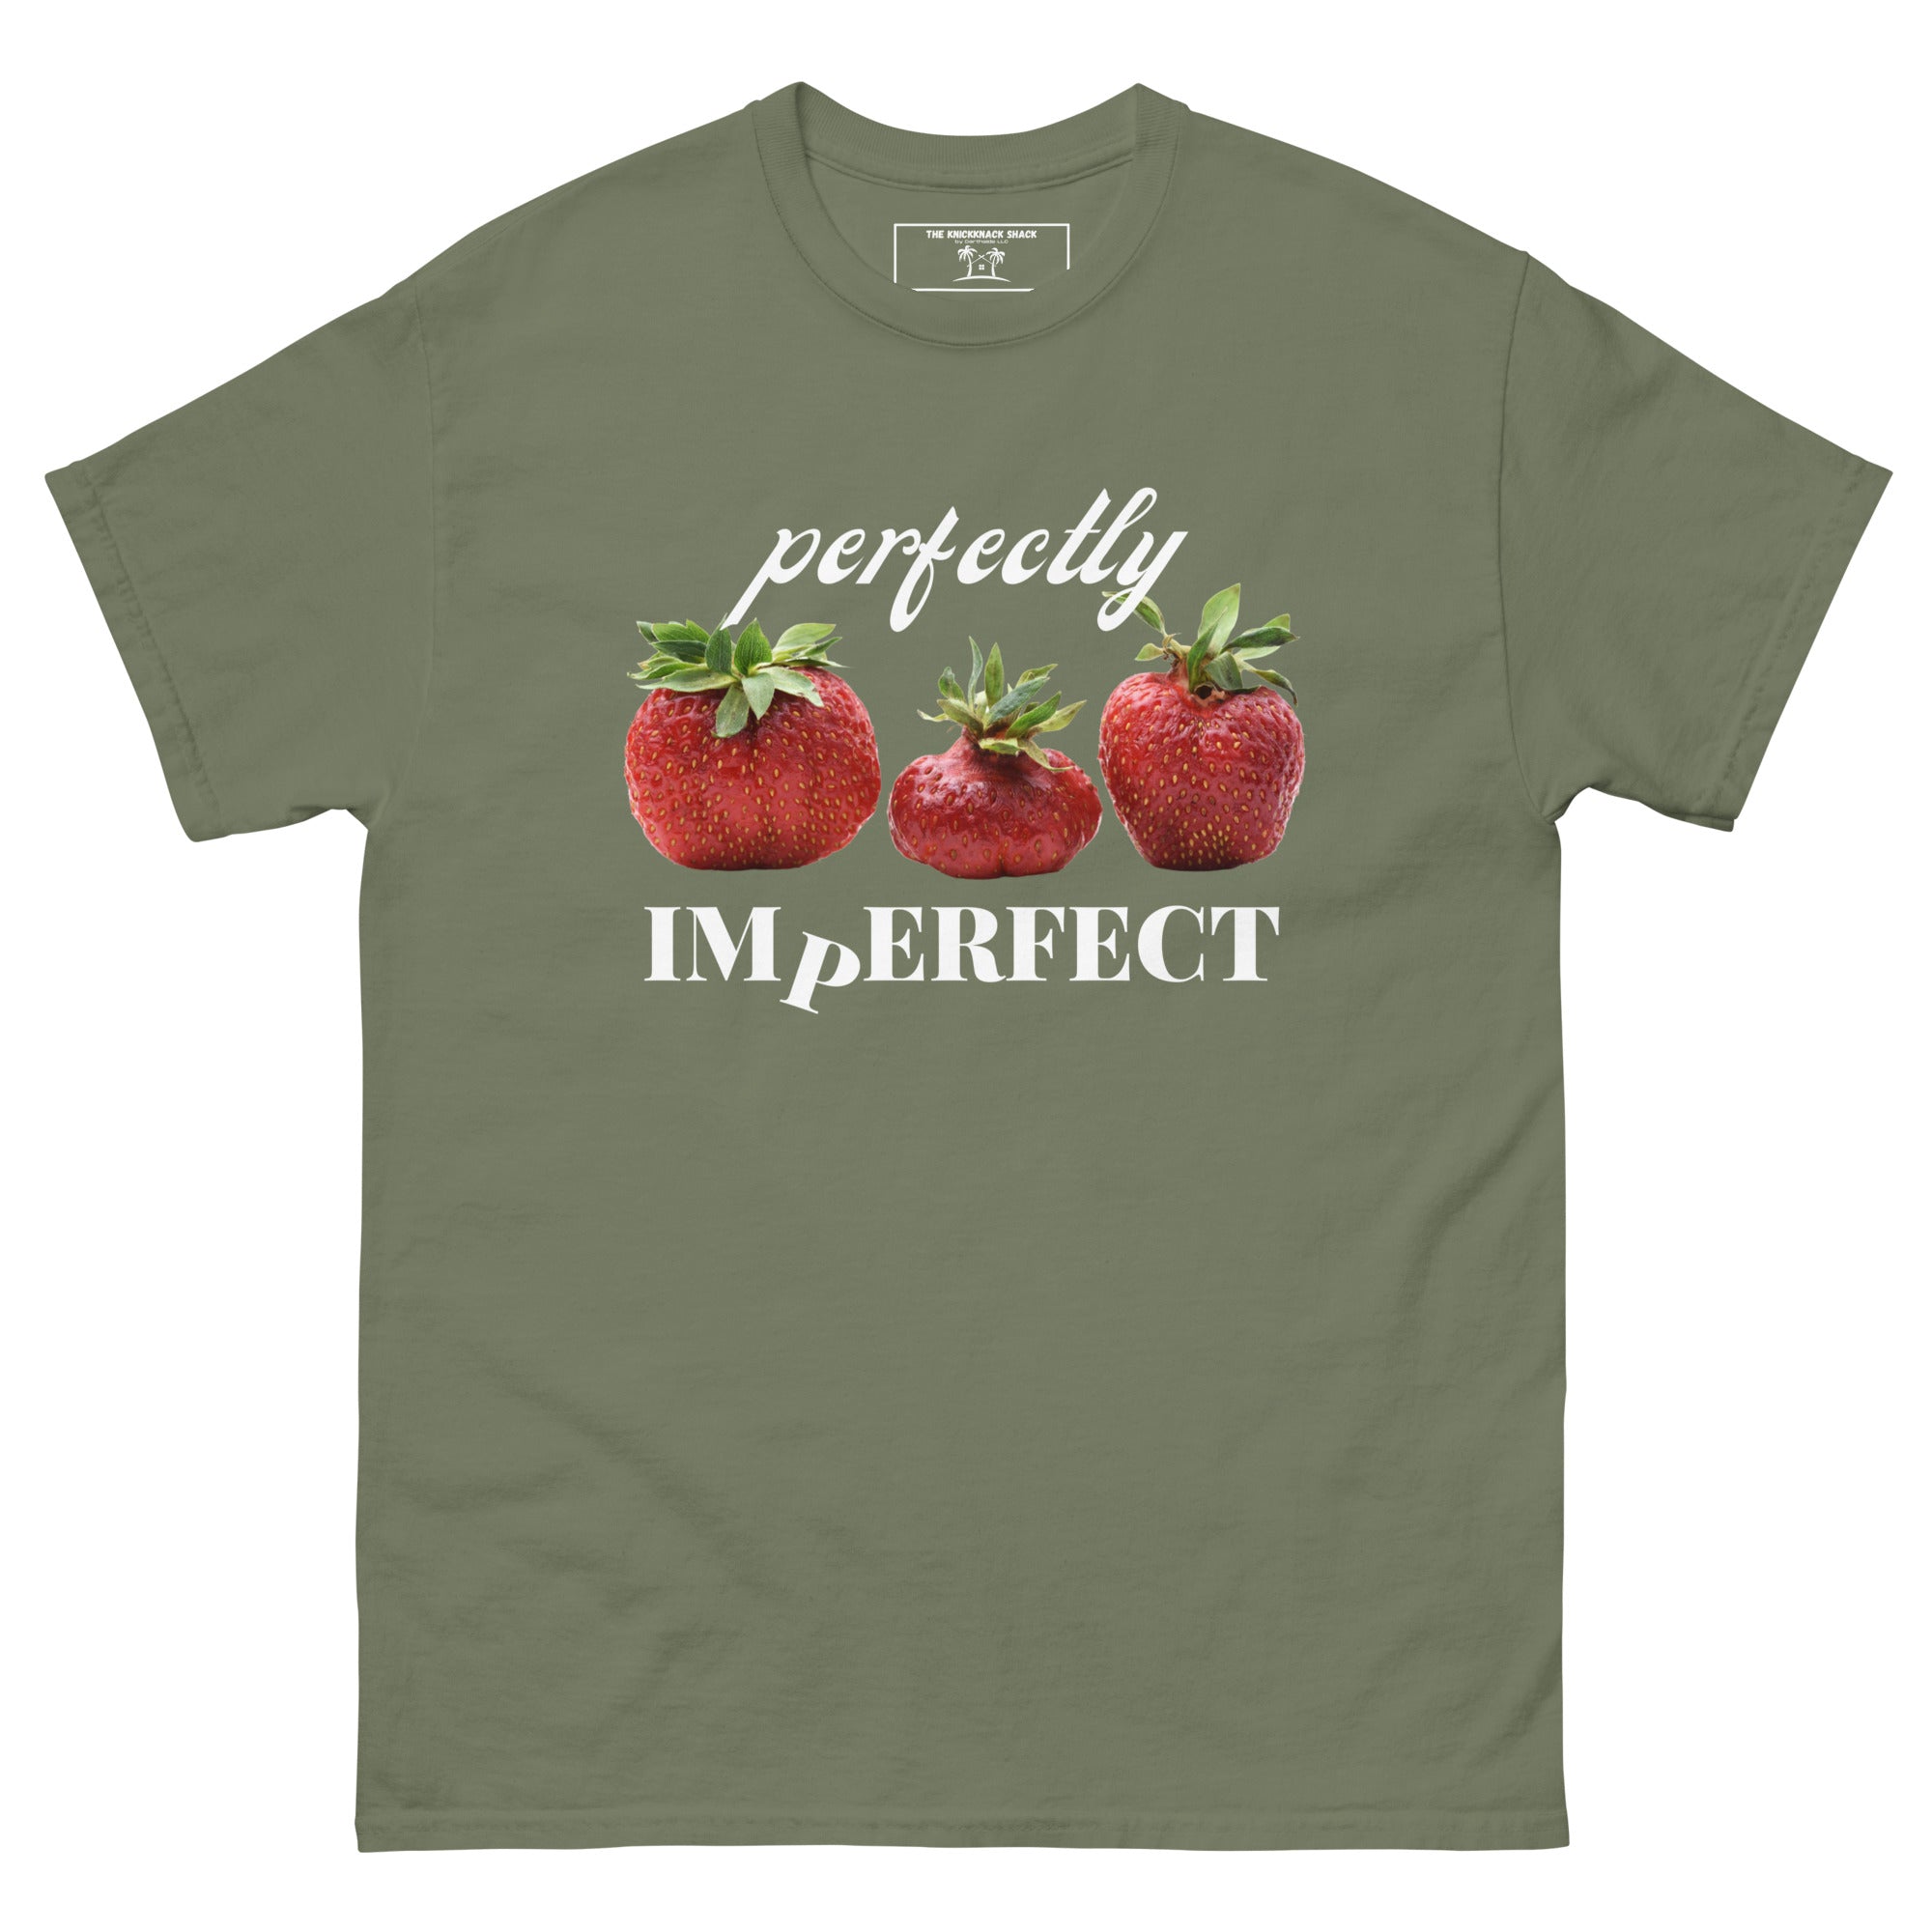 Classic Tee - Perfectly Imperfect (Style 1) (Dark Colors)